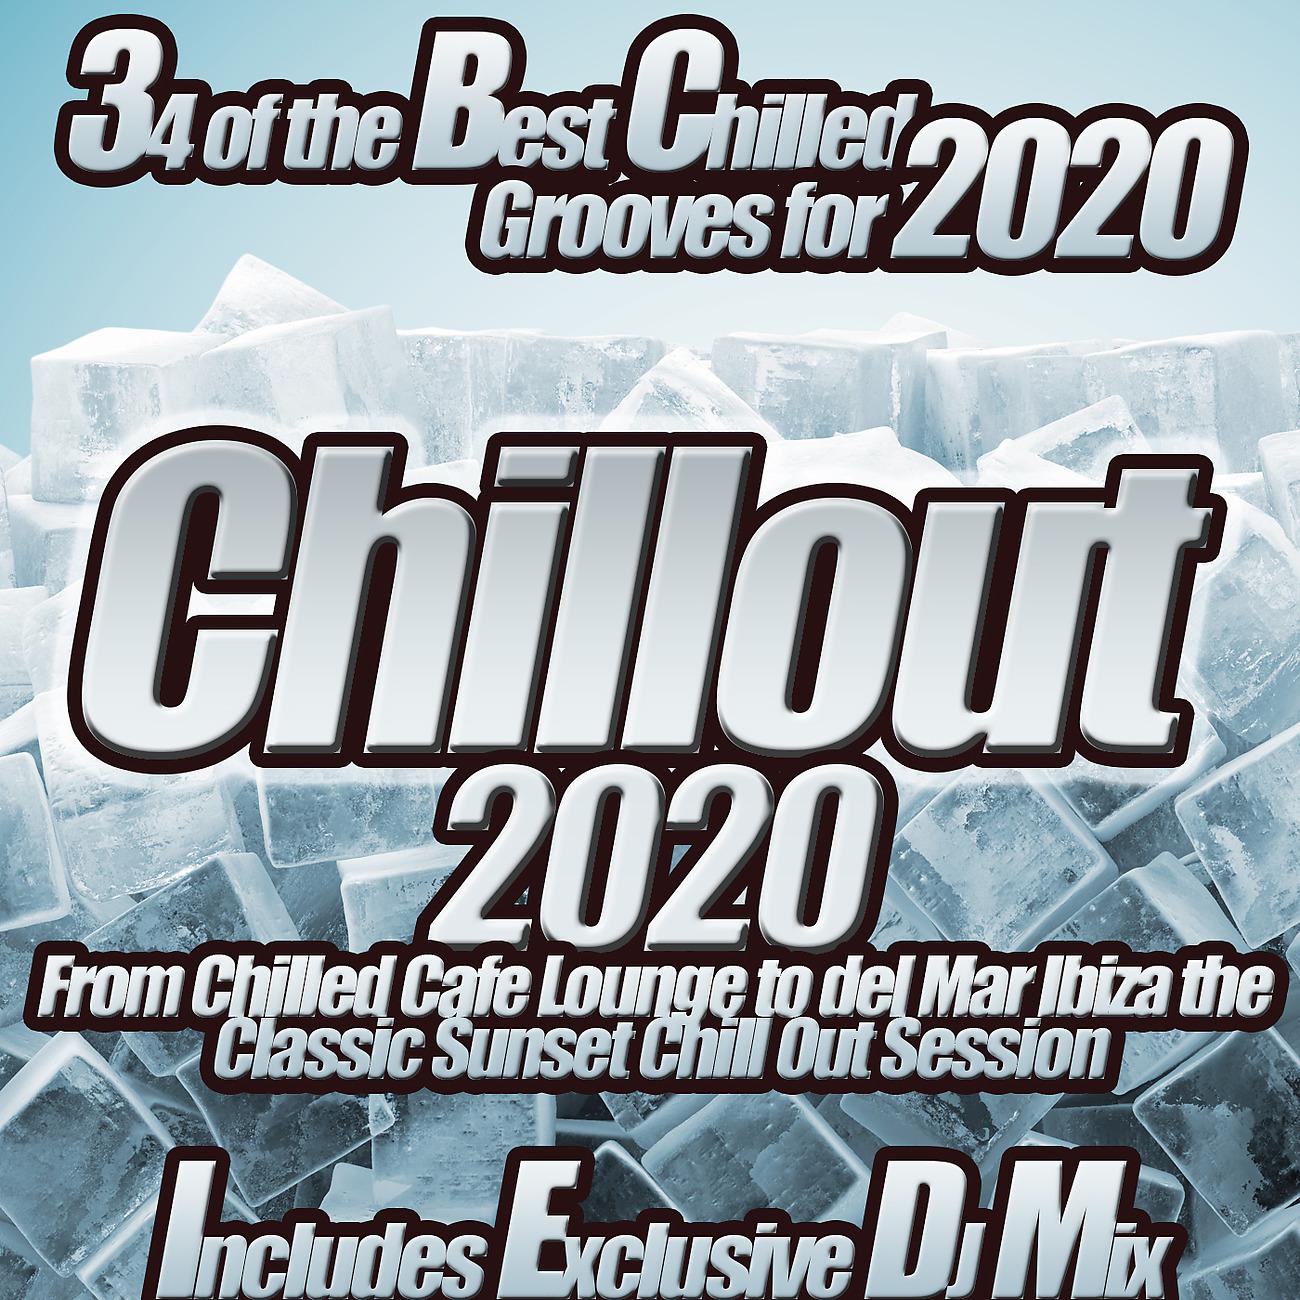 Постер альбома Chillout 2020 From Chilled Cafe Lounge to del Mar Ibiza the Classic Sunset Chill Out Session